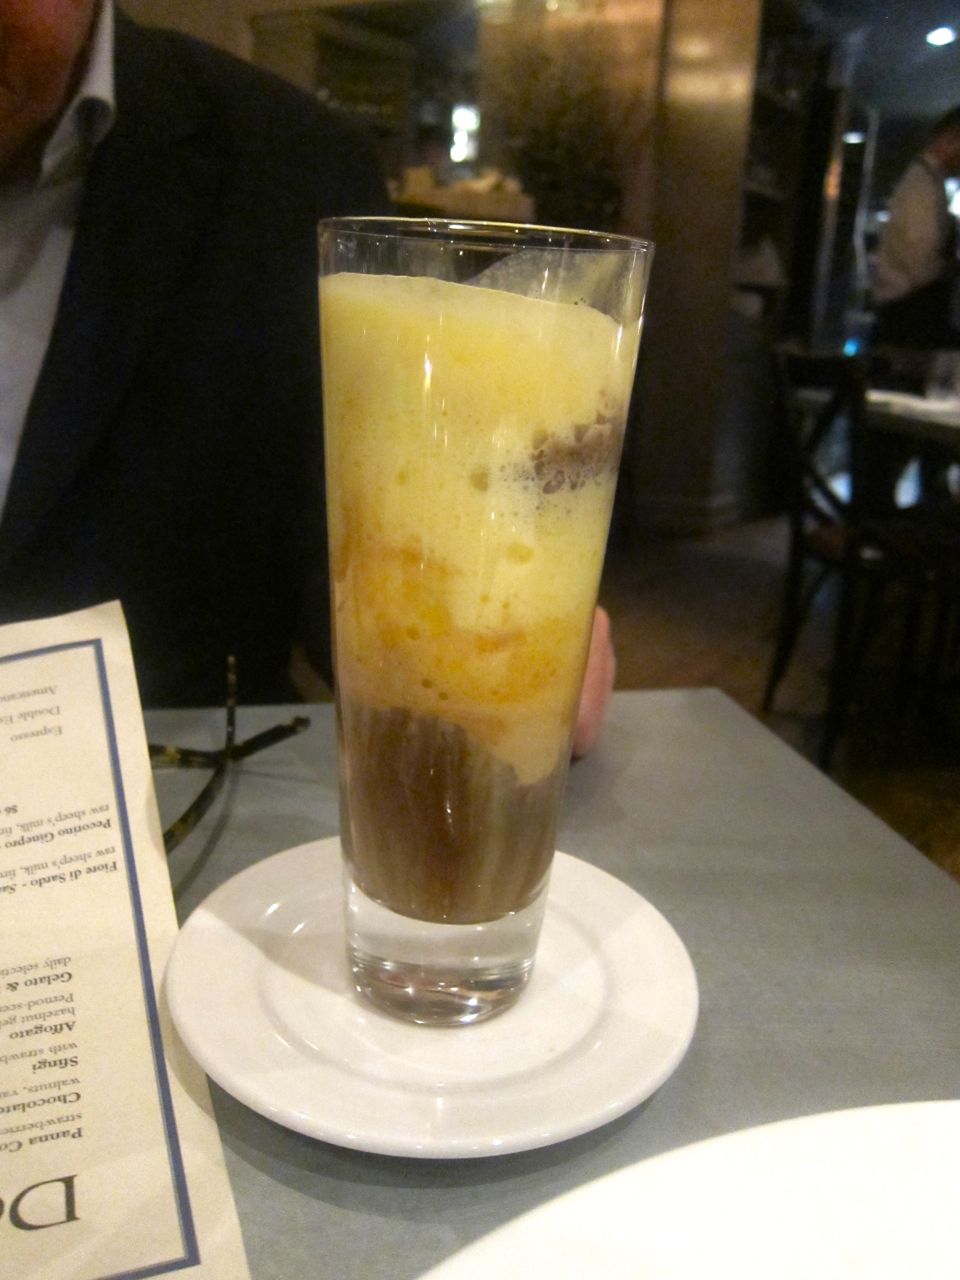 The 83 ½ affogato with Pernod-scented zabaglione is the best I’ve ever tasted.